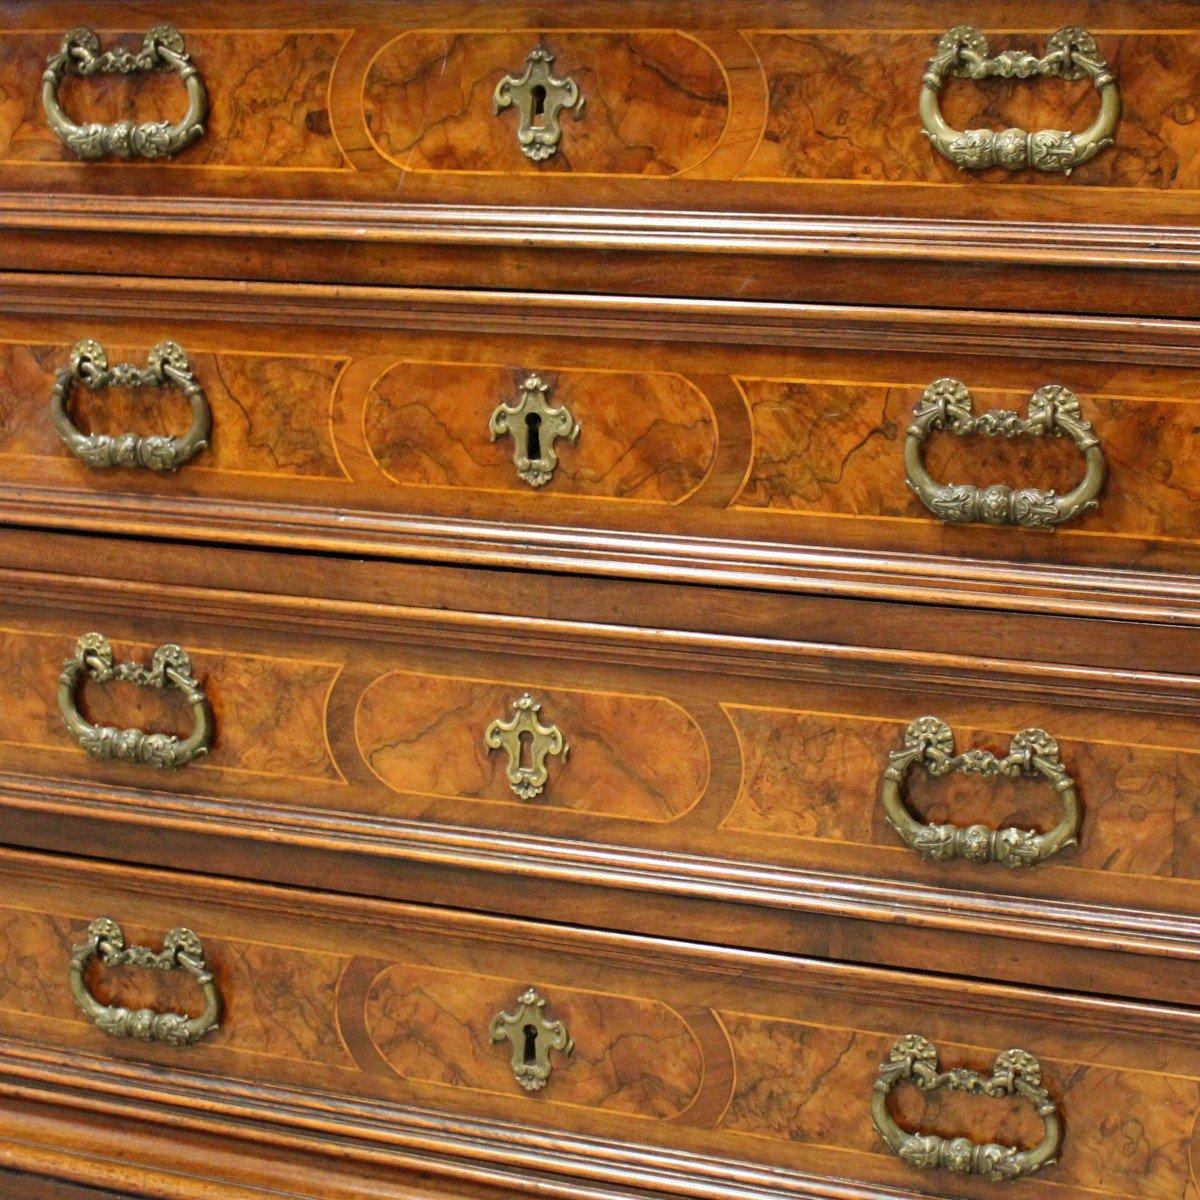 18th Century Italian Walnut Commode with Four Drawers and Ornate Hardware For Sale 6